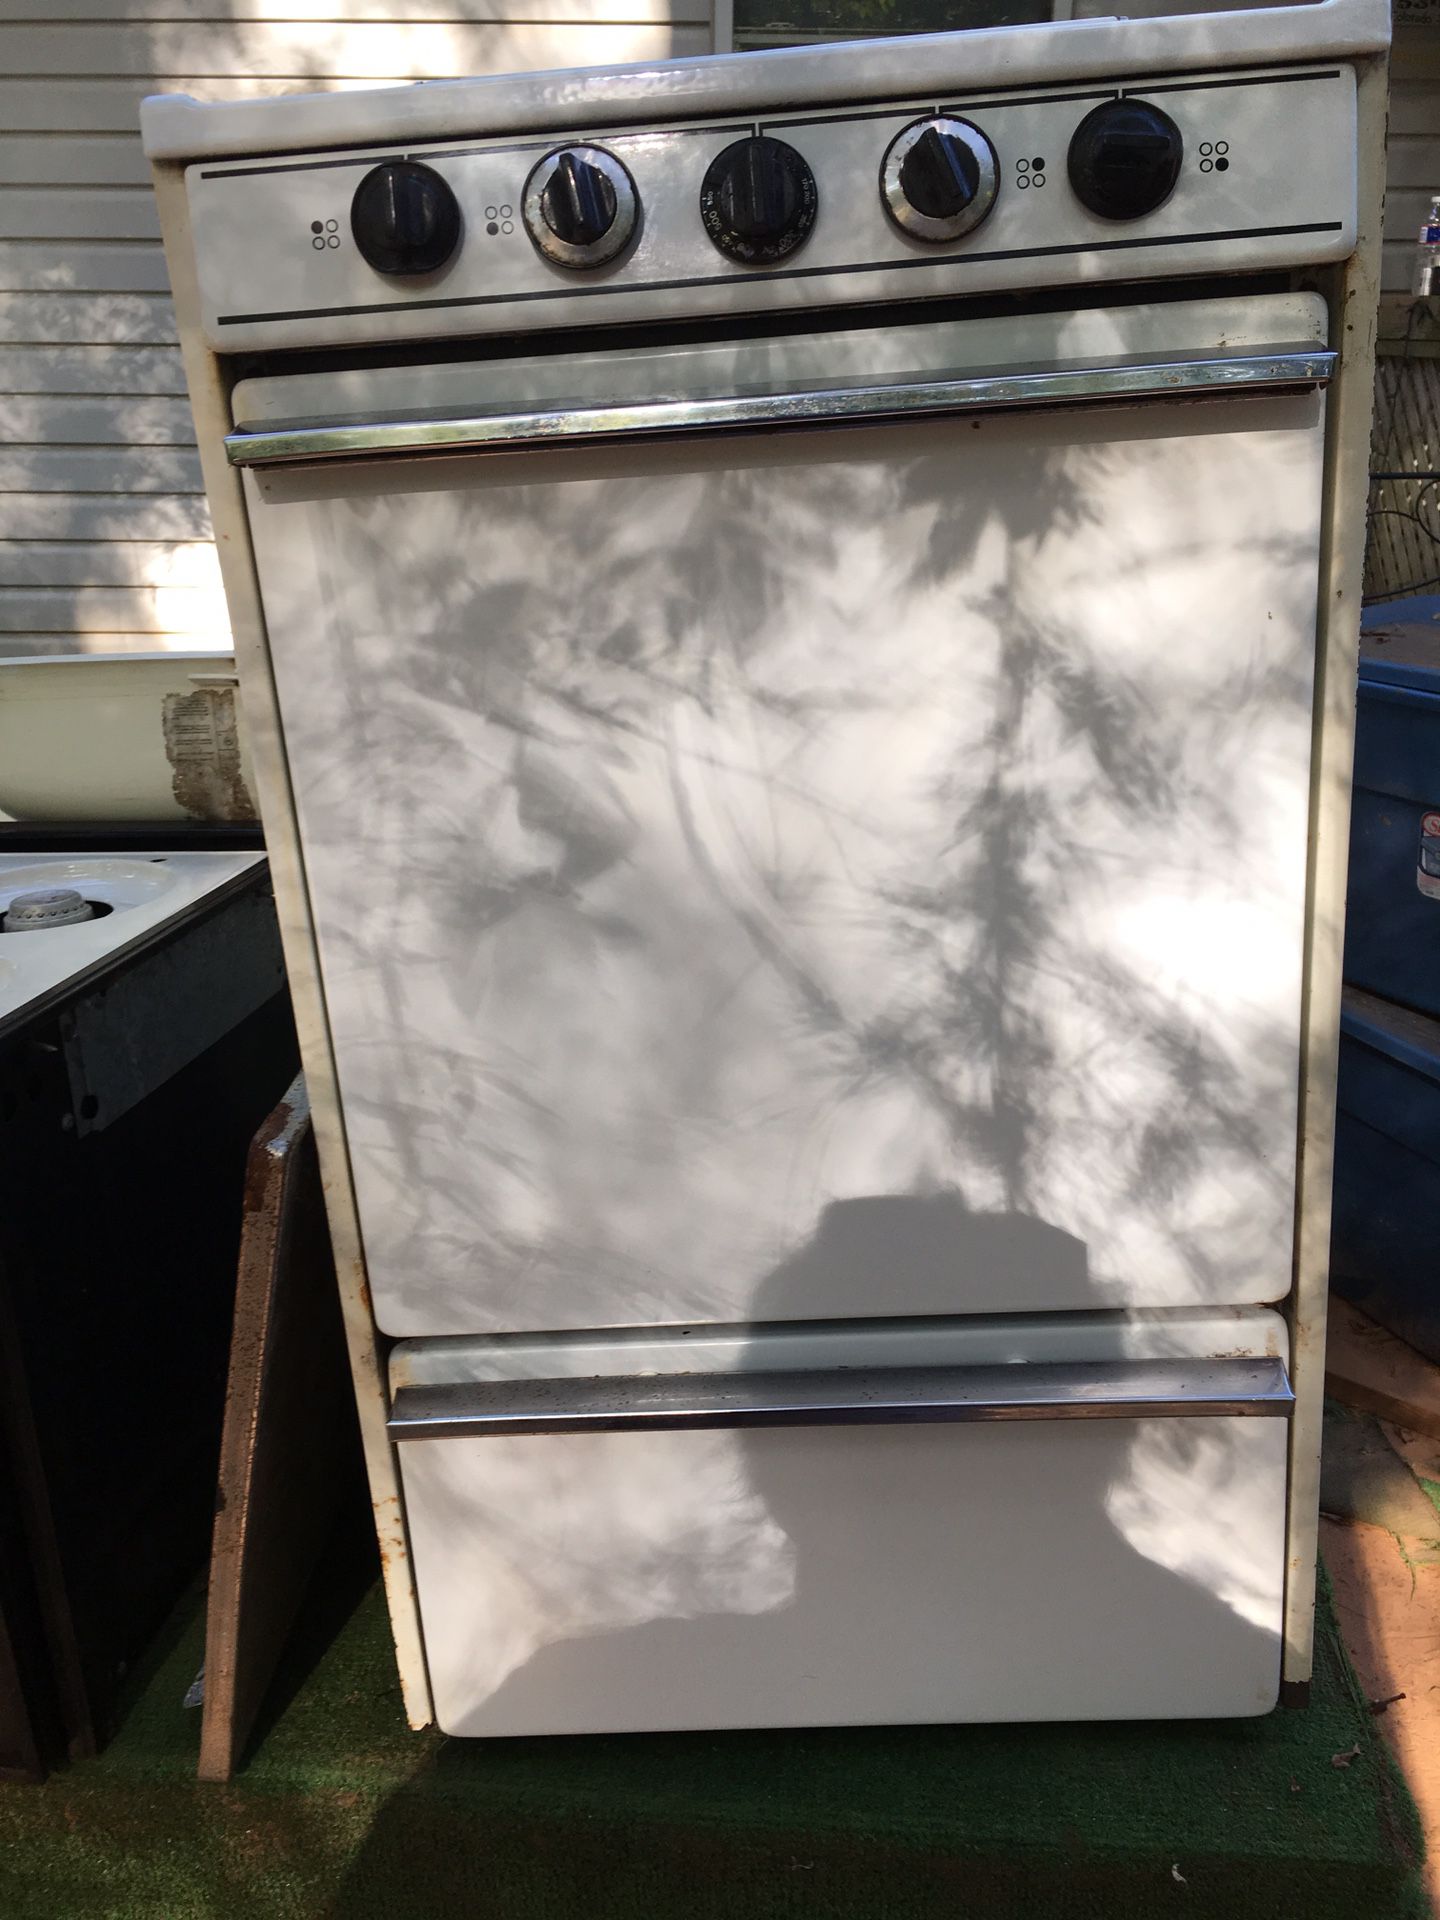 Small standing range/oven for rv camper or small apt. Gas